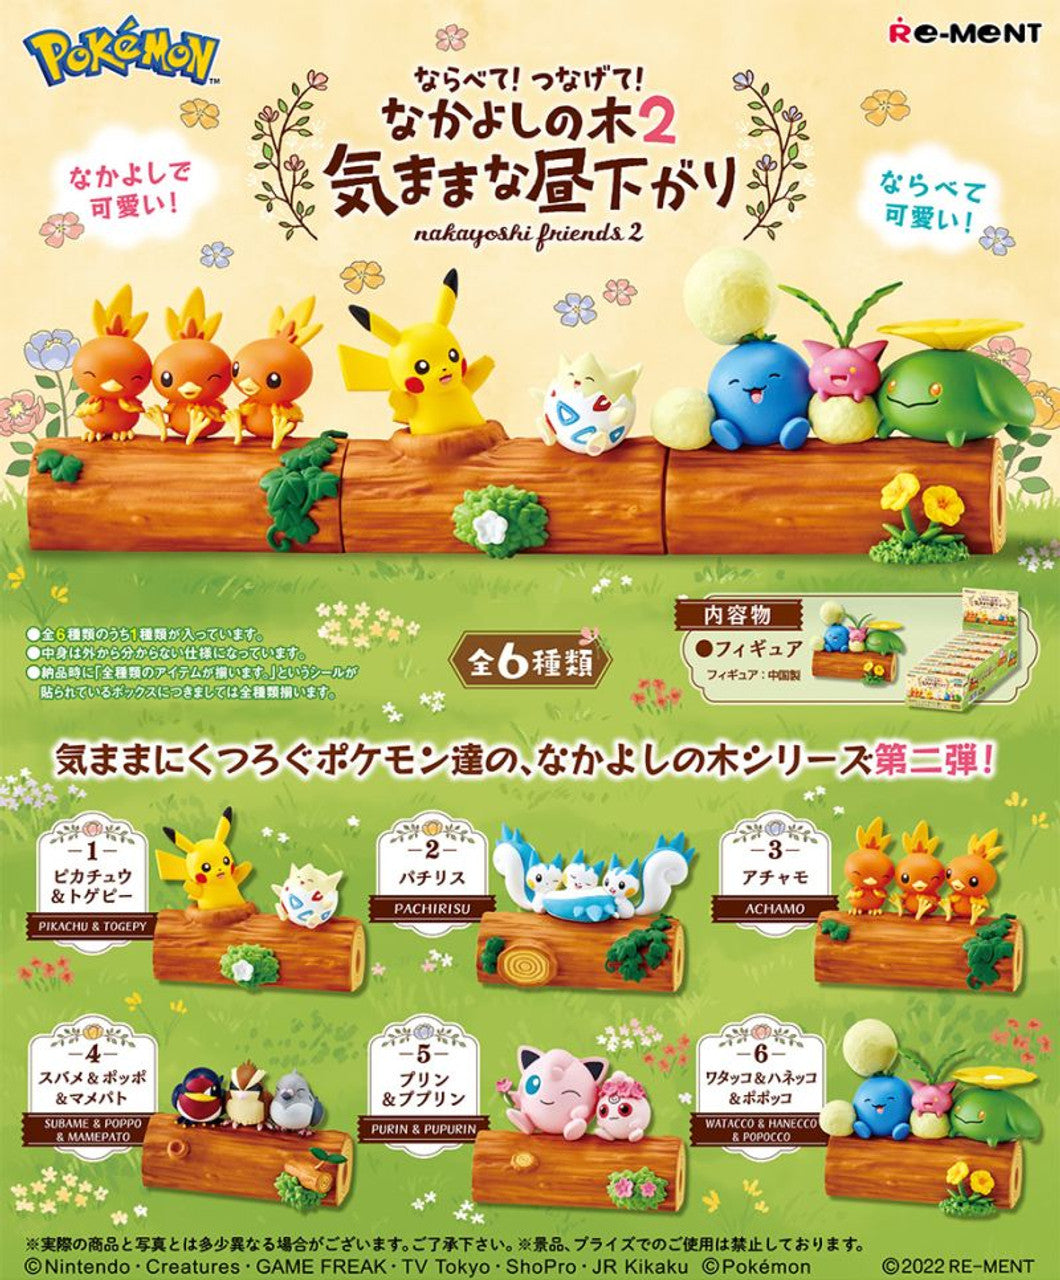 Re-Ment Pokemon Connect! Nakayoshi Friends Vol.2 Cozy Afternoon Trading Figures Box Set of 6